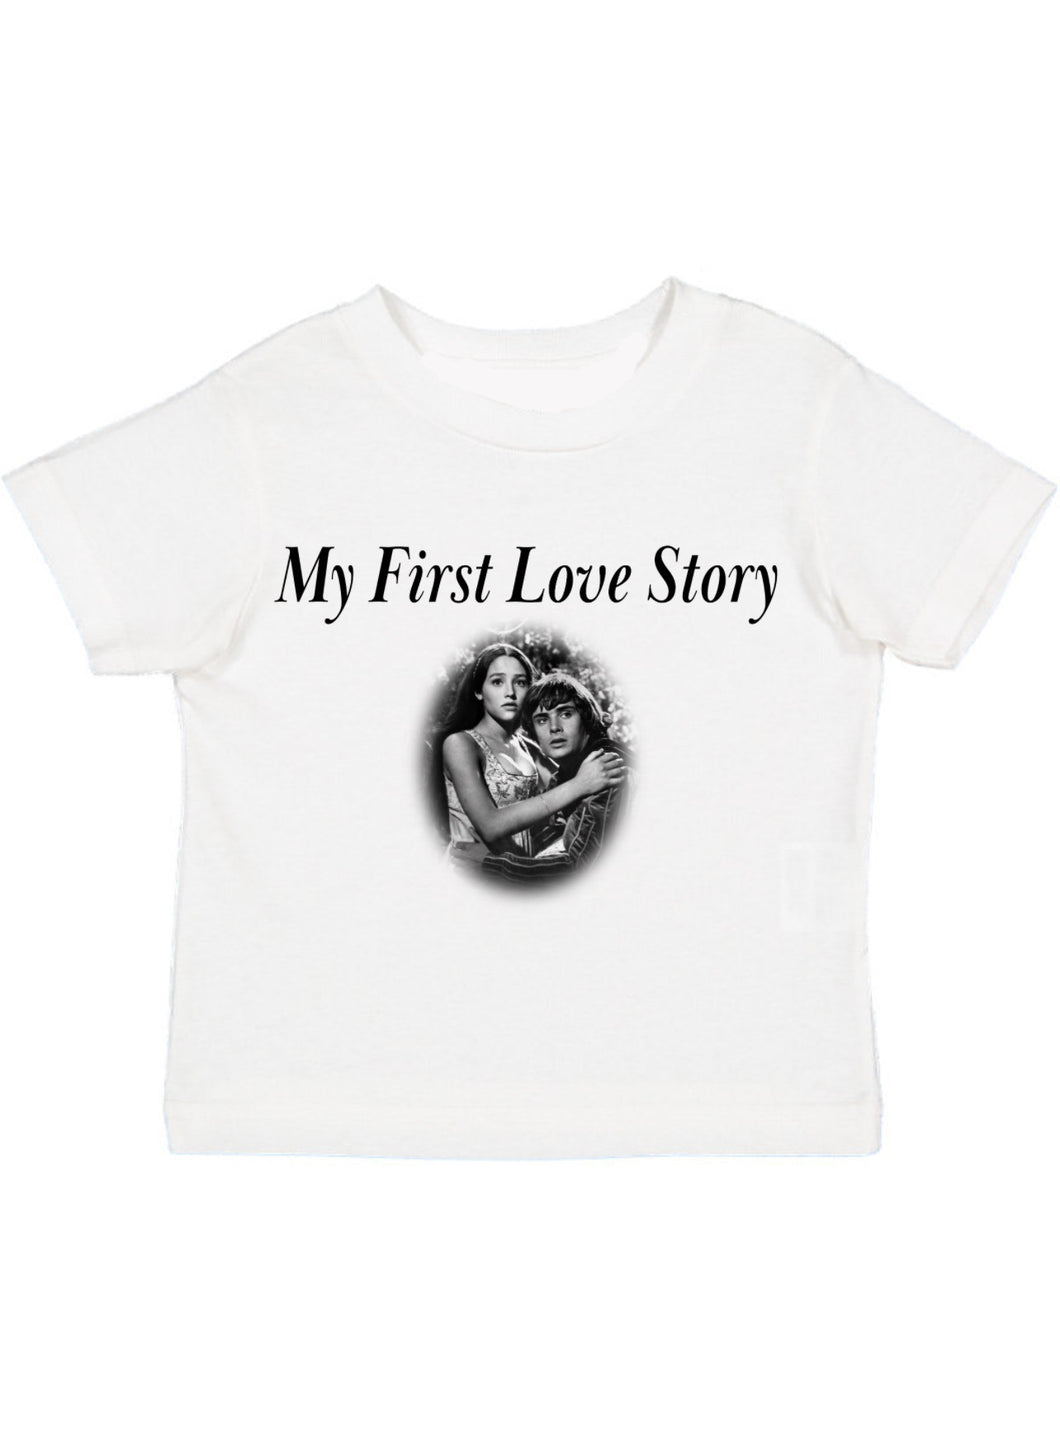 My First Love Story - White